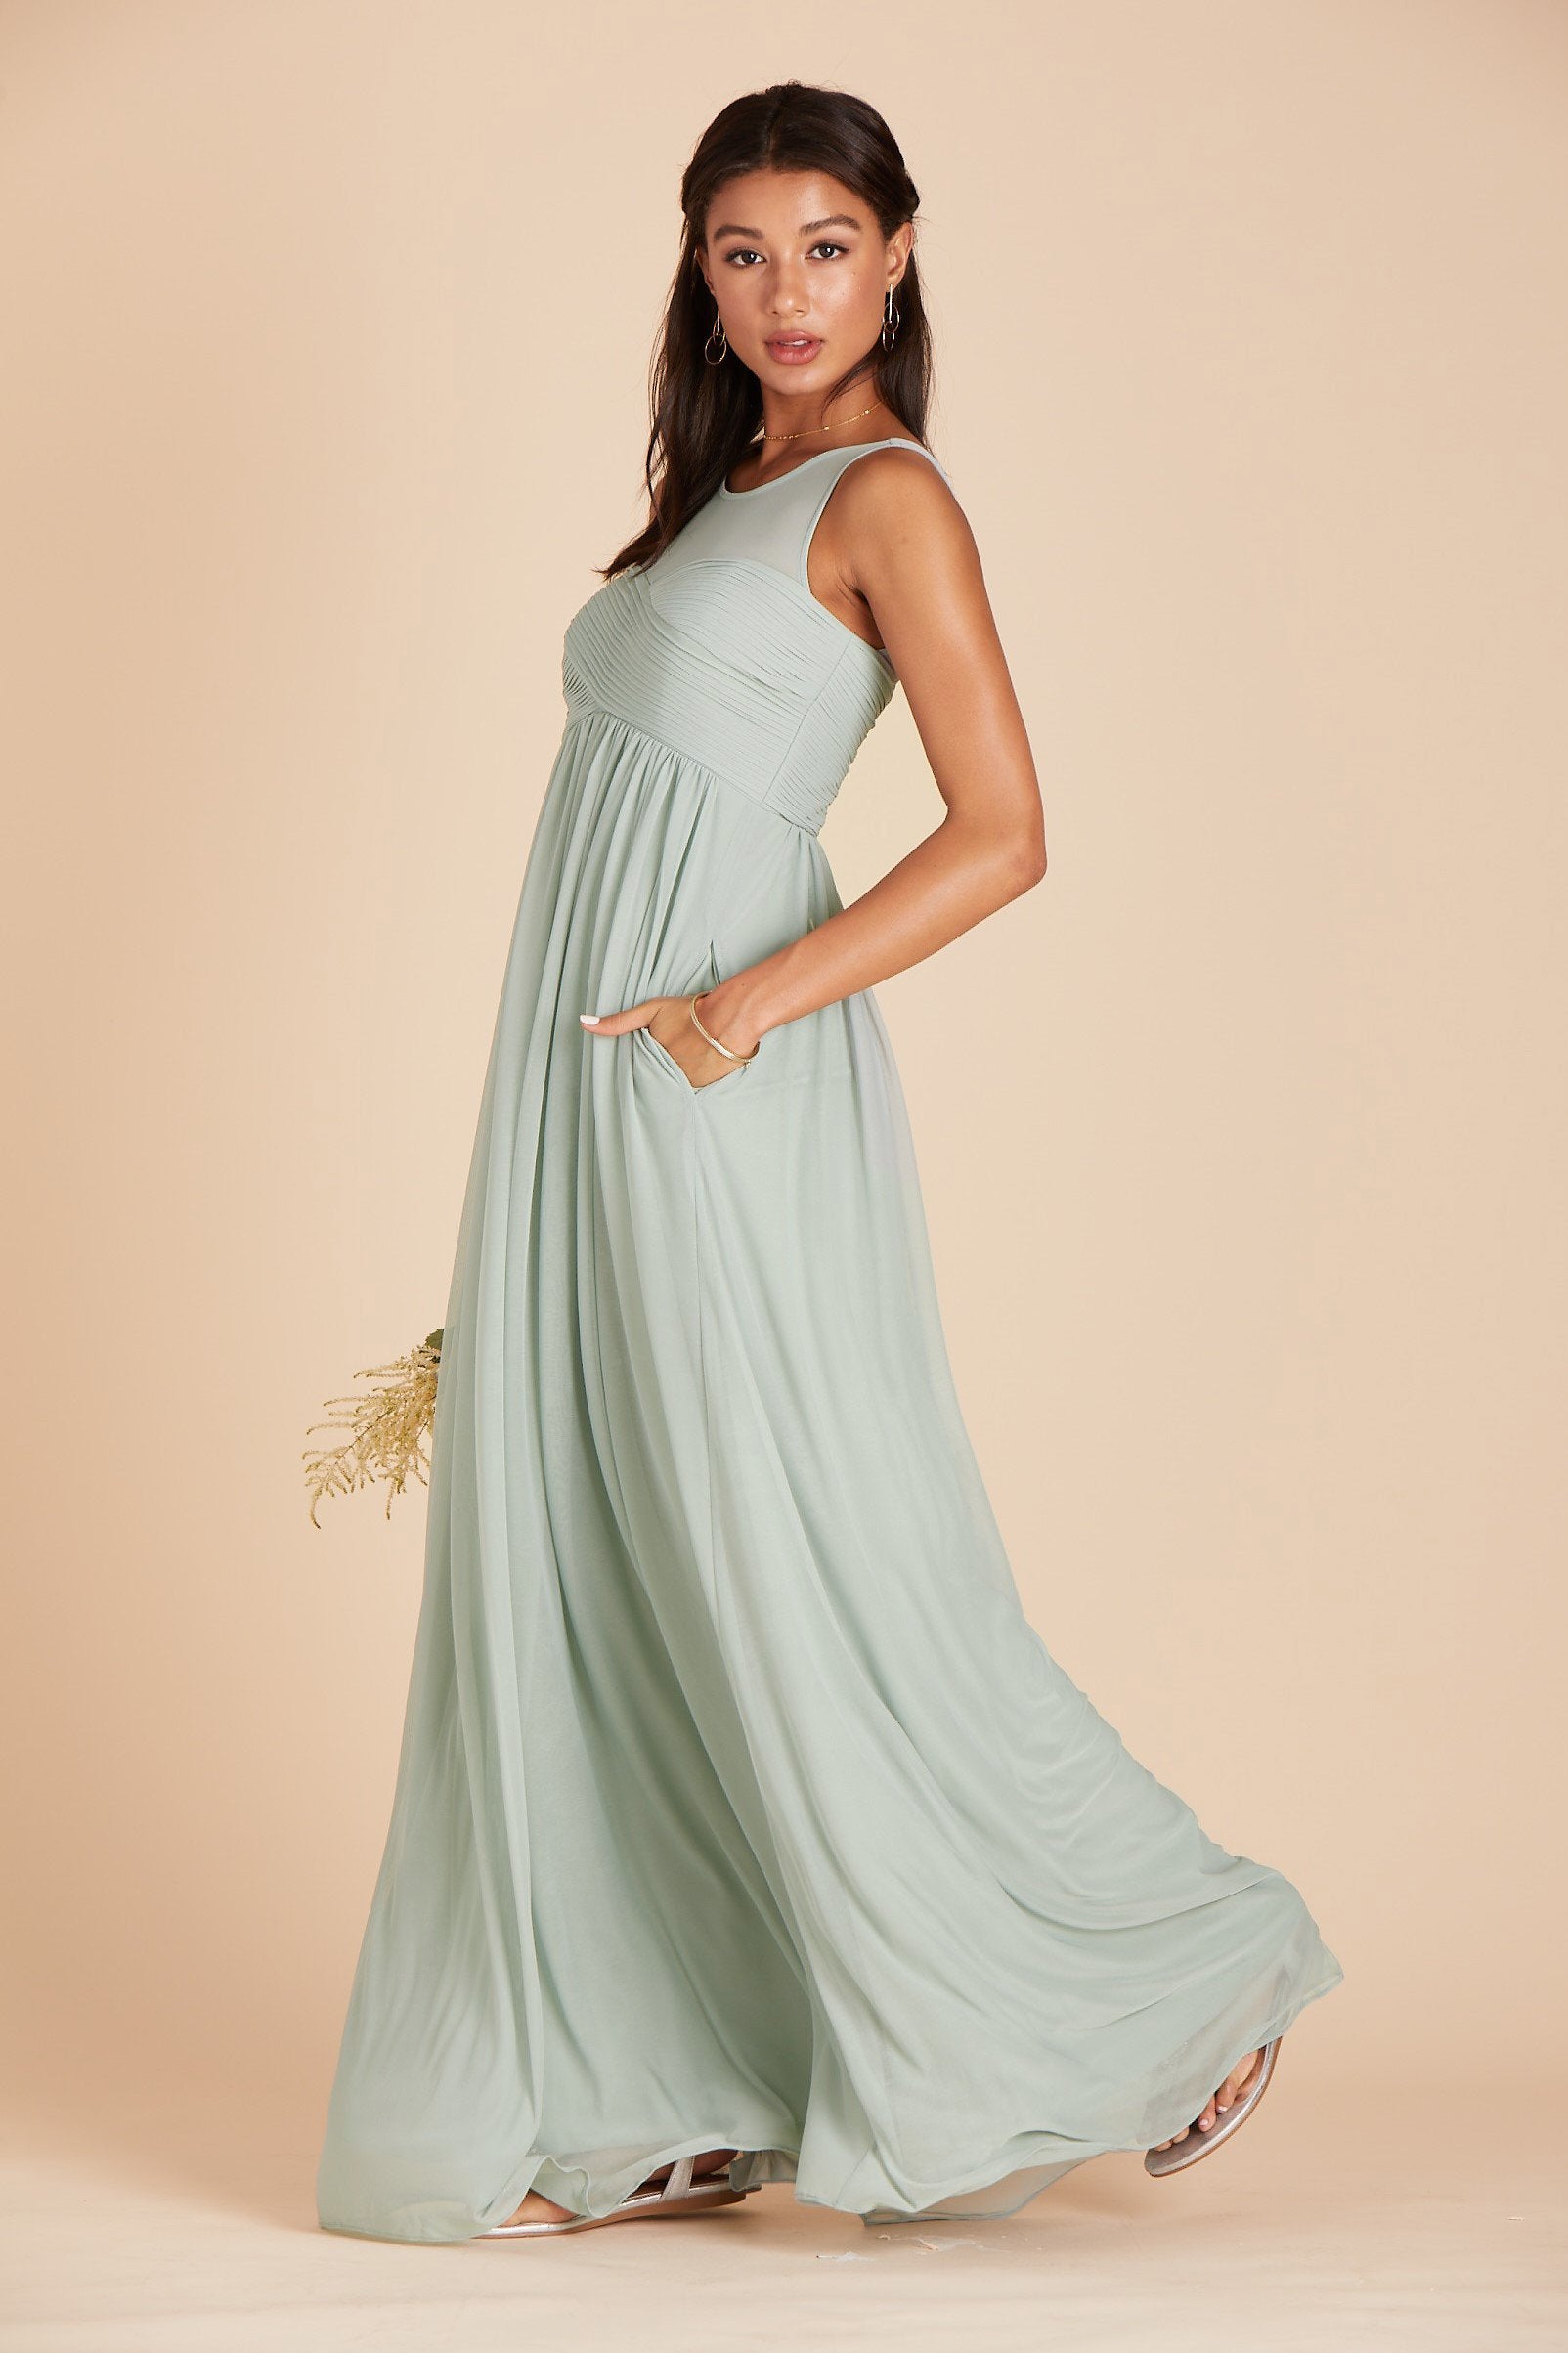 Ryan bridesmaid dress in sage green chiffon by Birdy Grey, side view with hand in pocket